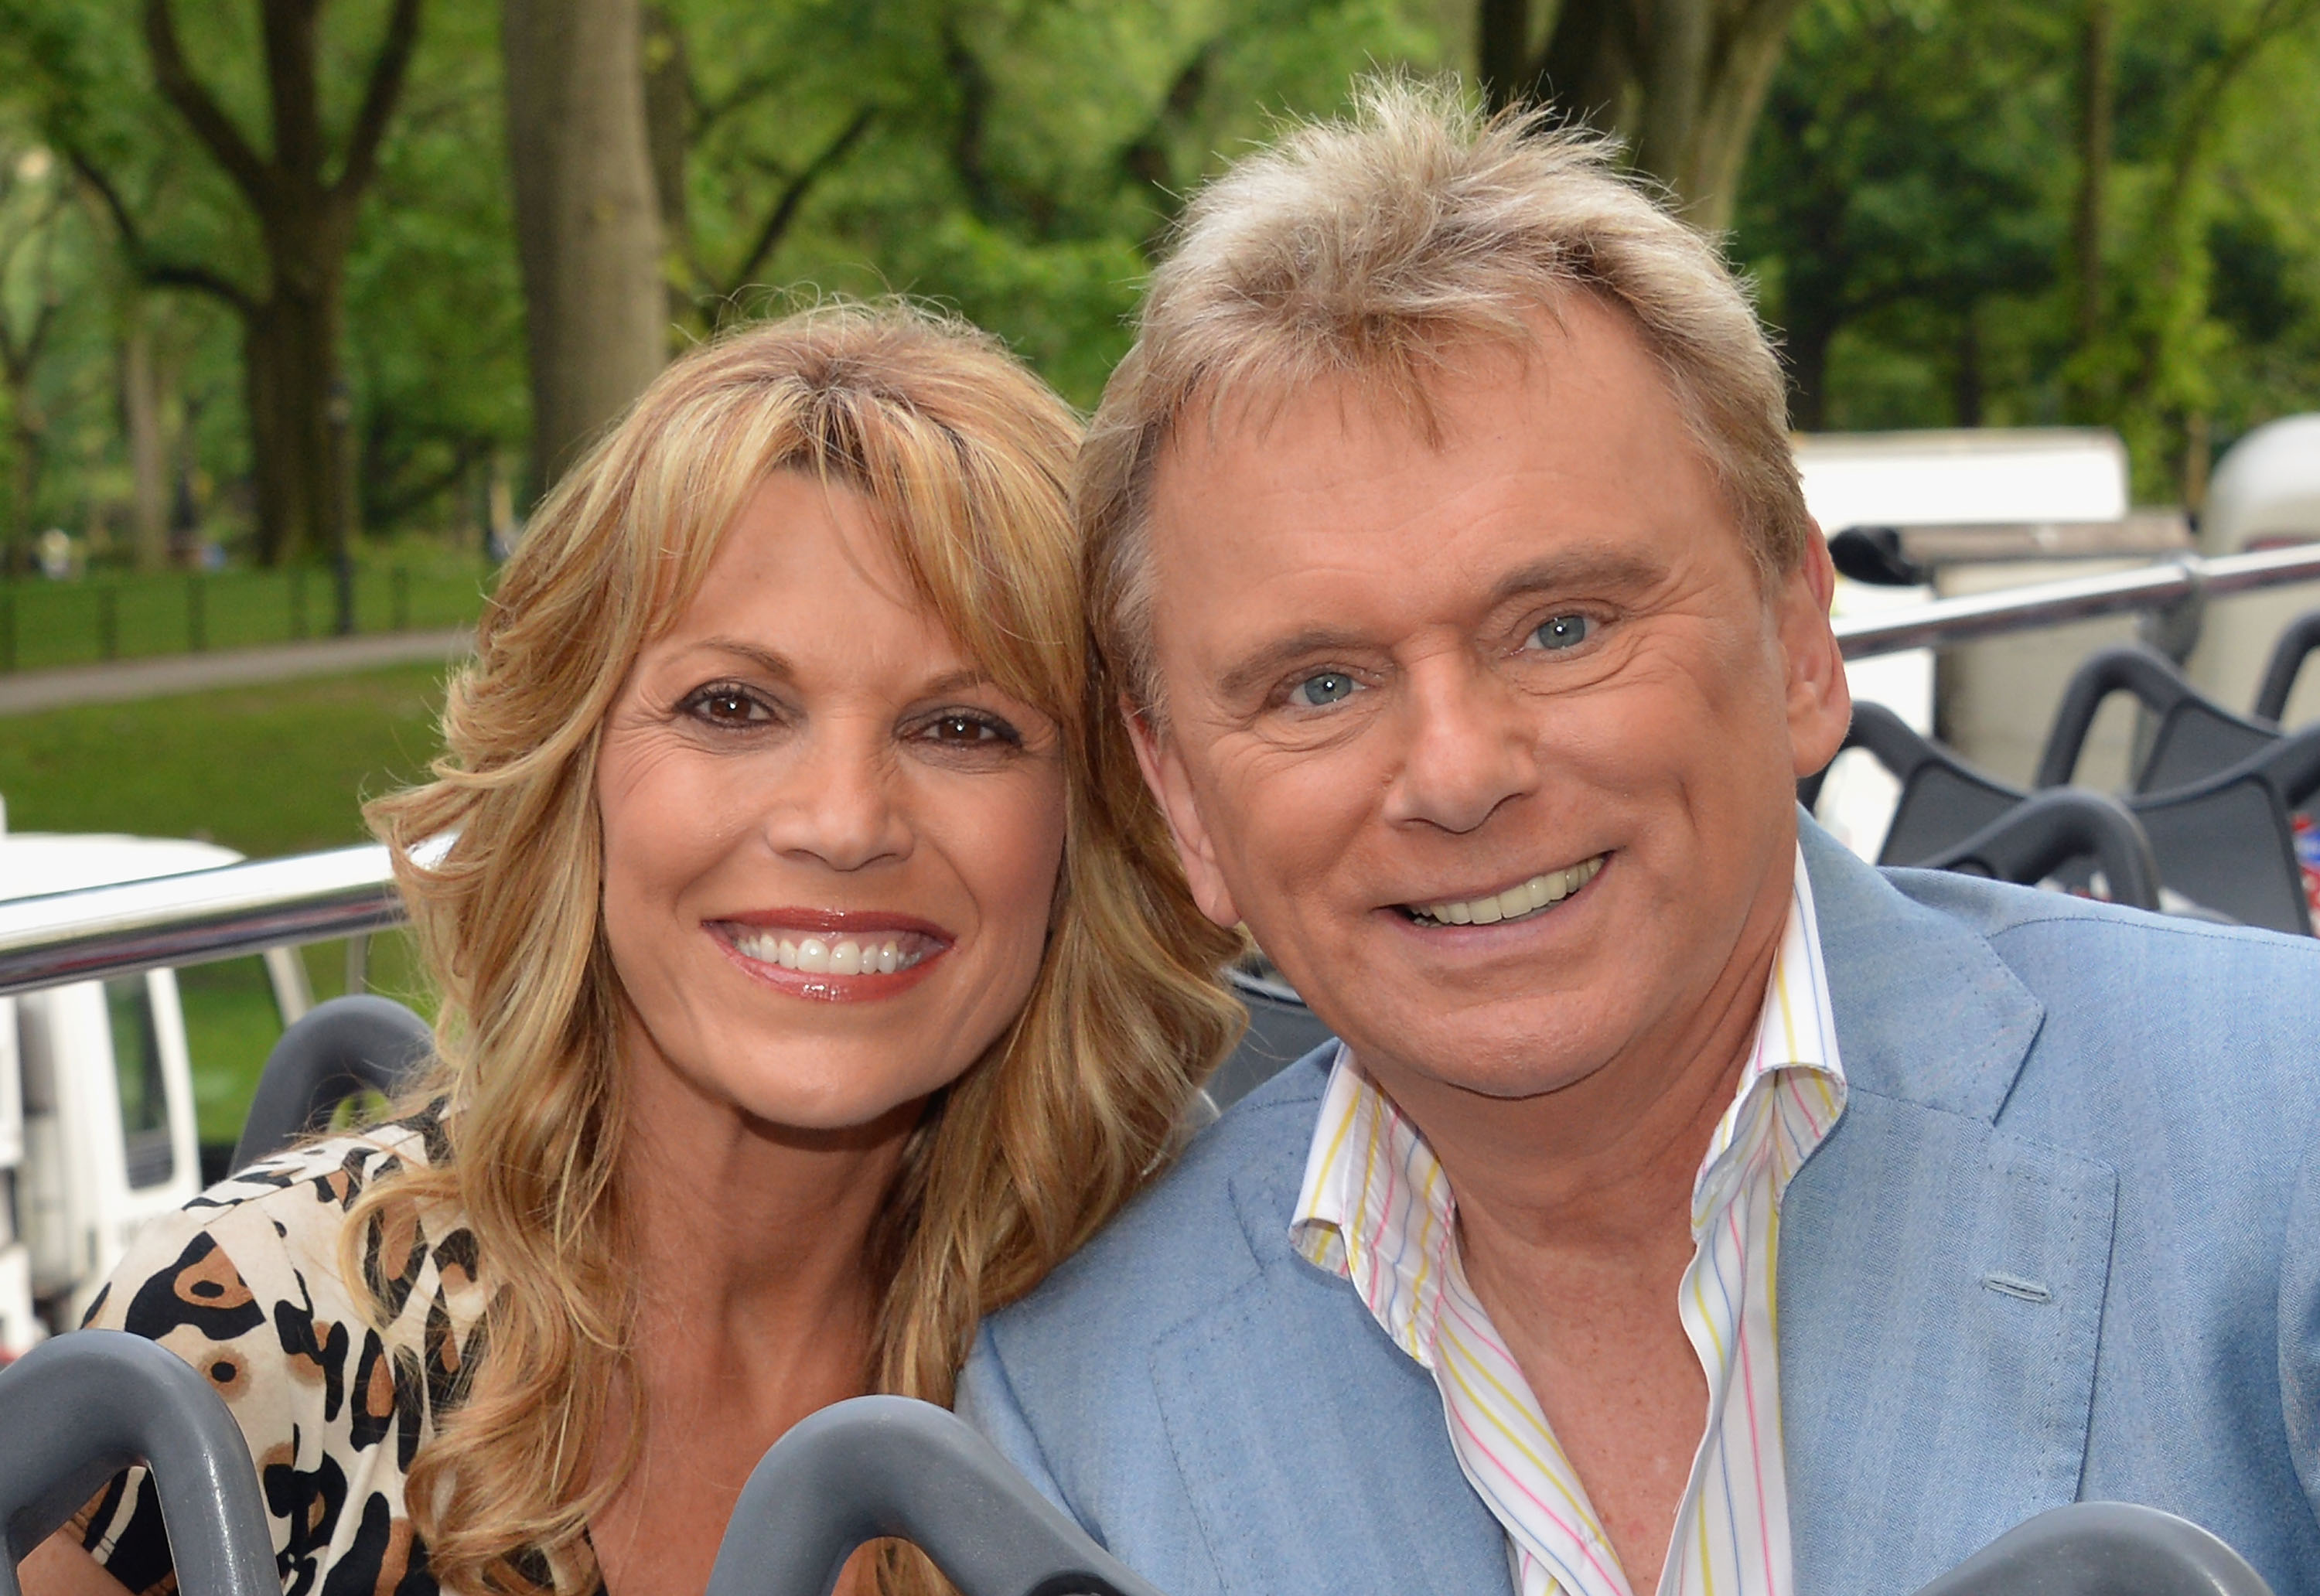 How long has pat sajak and vanna white hosted wheel of fortune